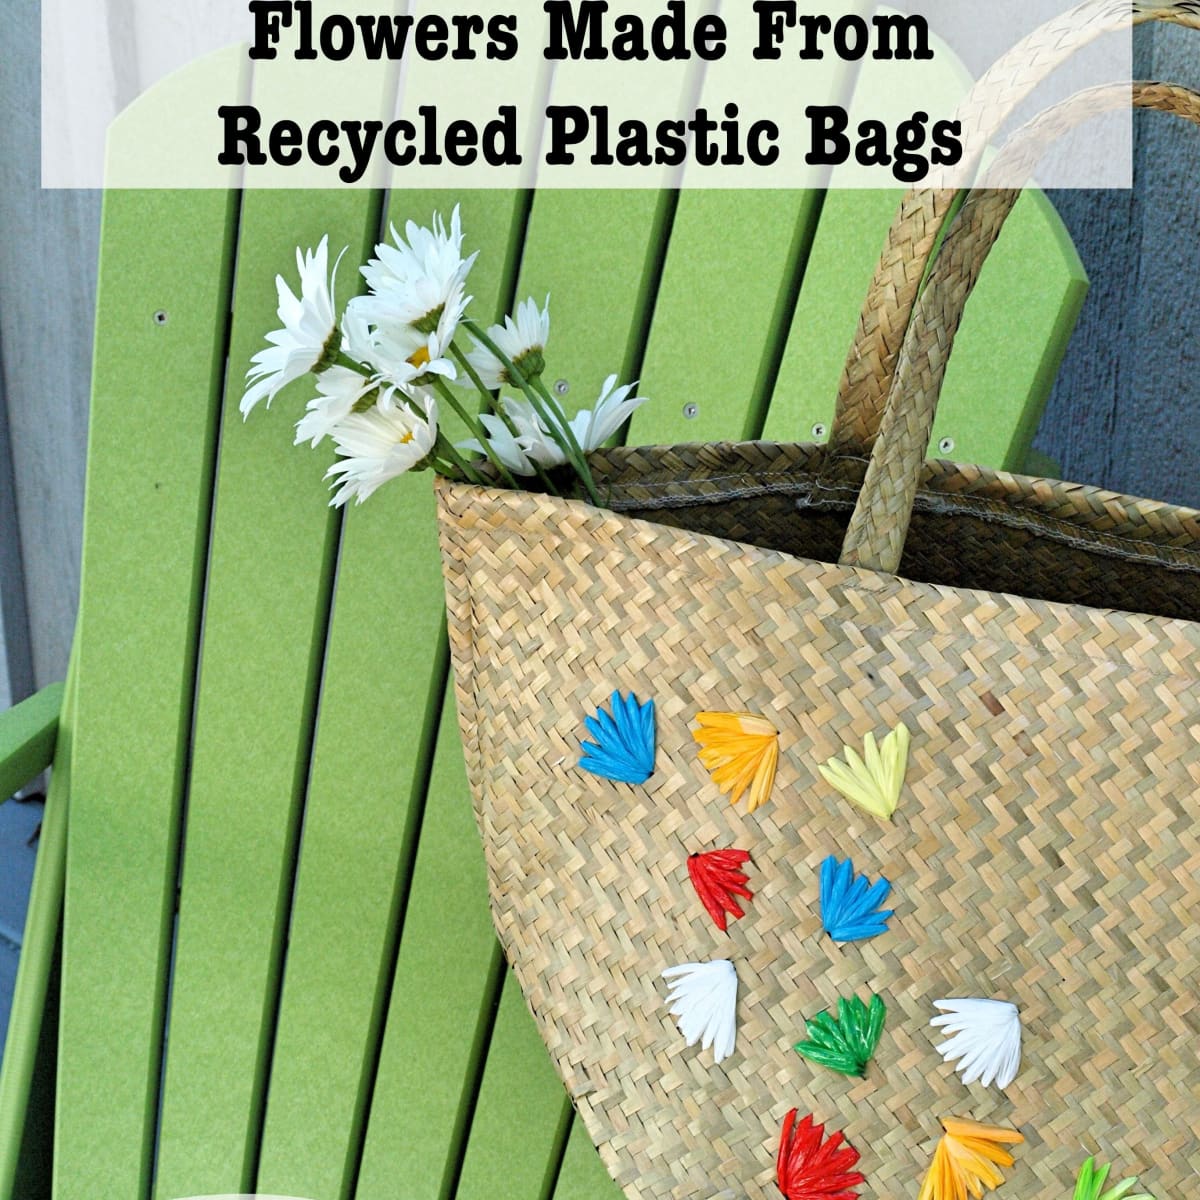 How to Embellish a Straw Bag With Recycled Plastic Bags - FeltMagnet